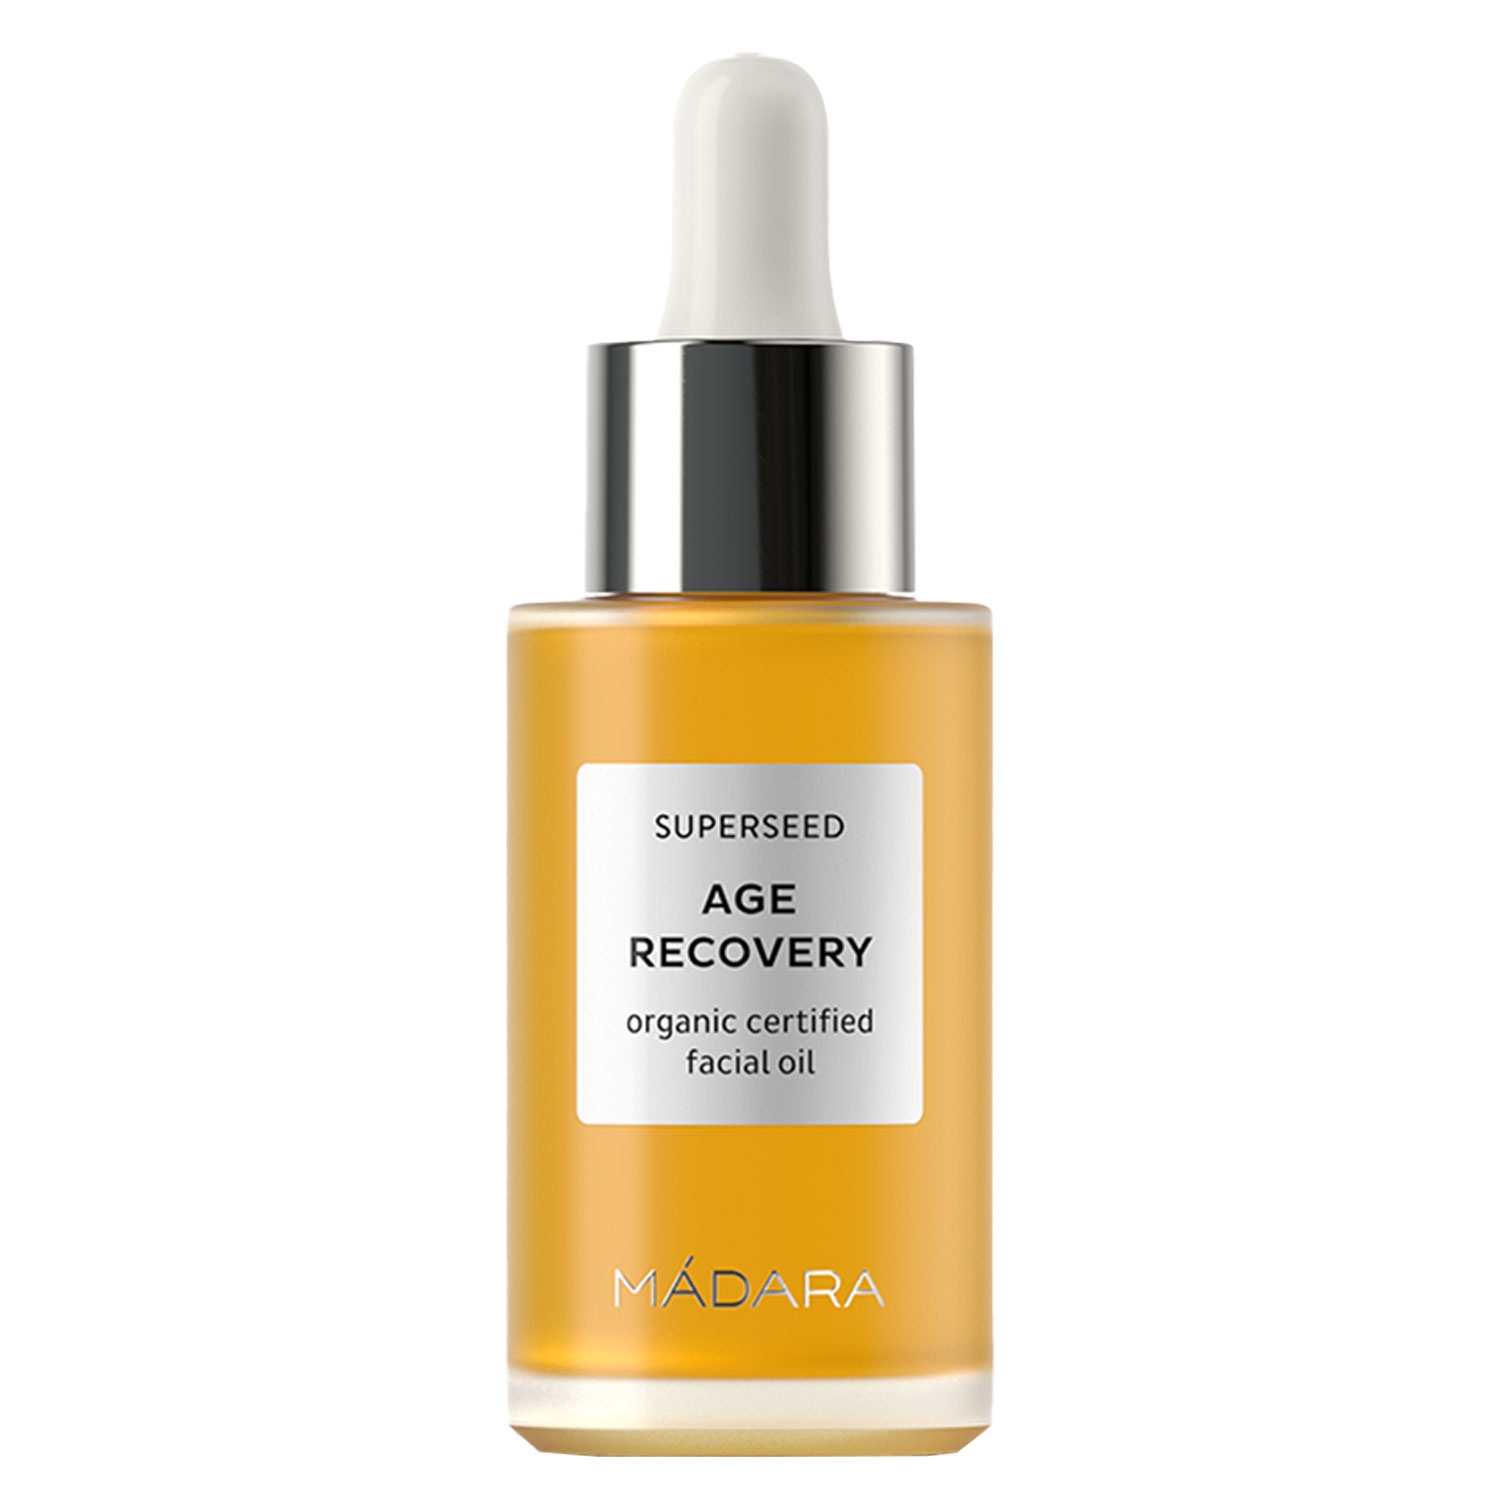 Produktbild von MÁDARA Care - Superseed Age Recovery Facial Oil